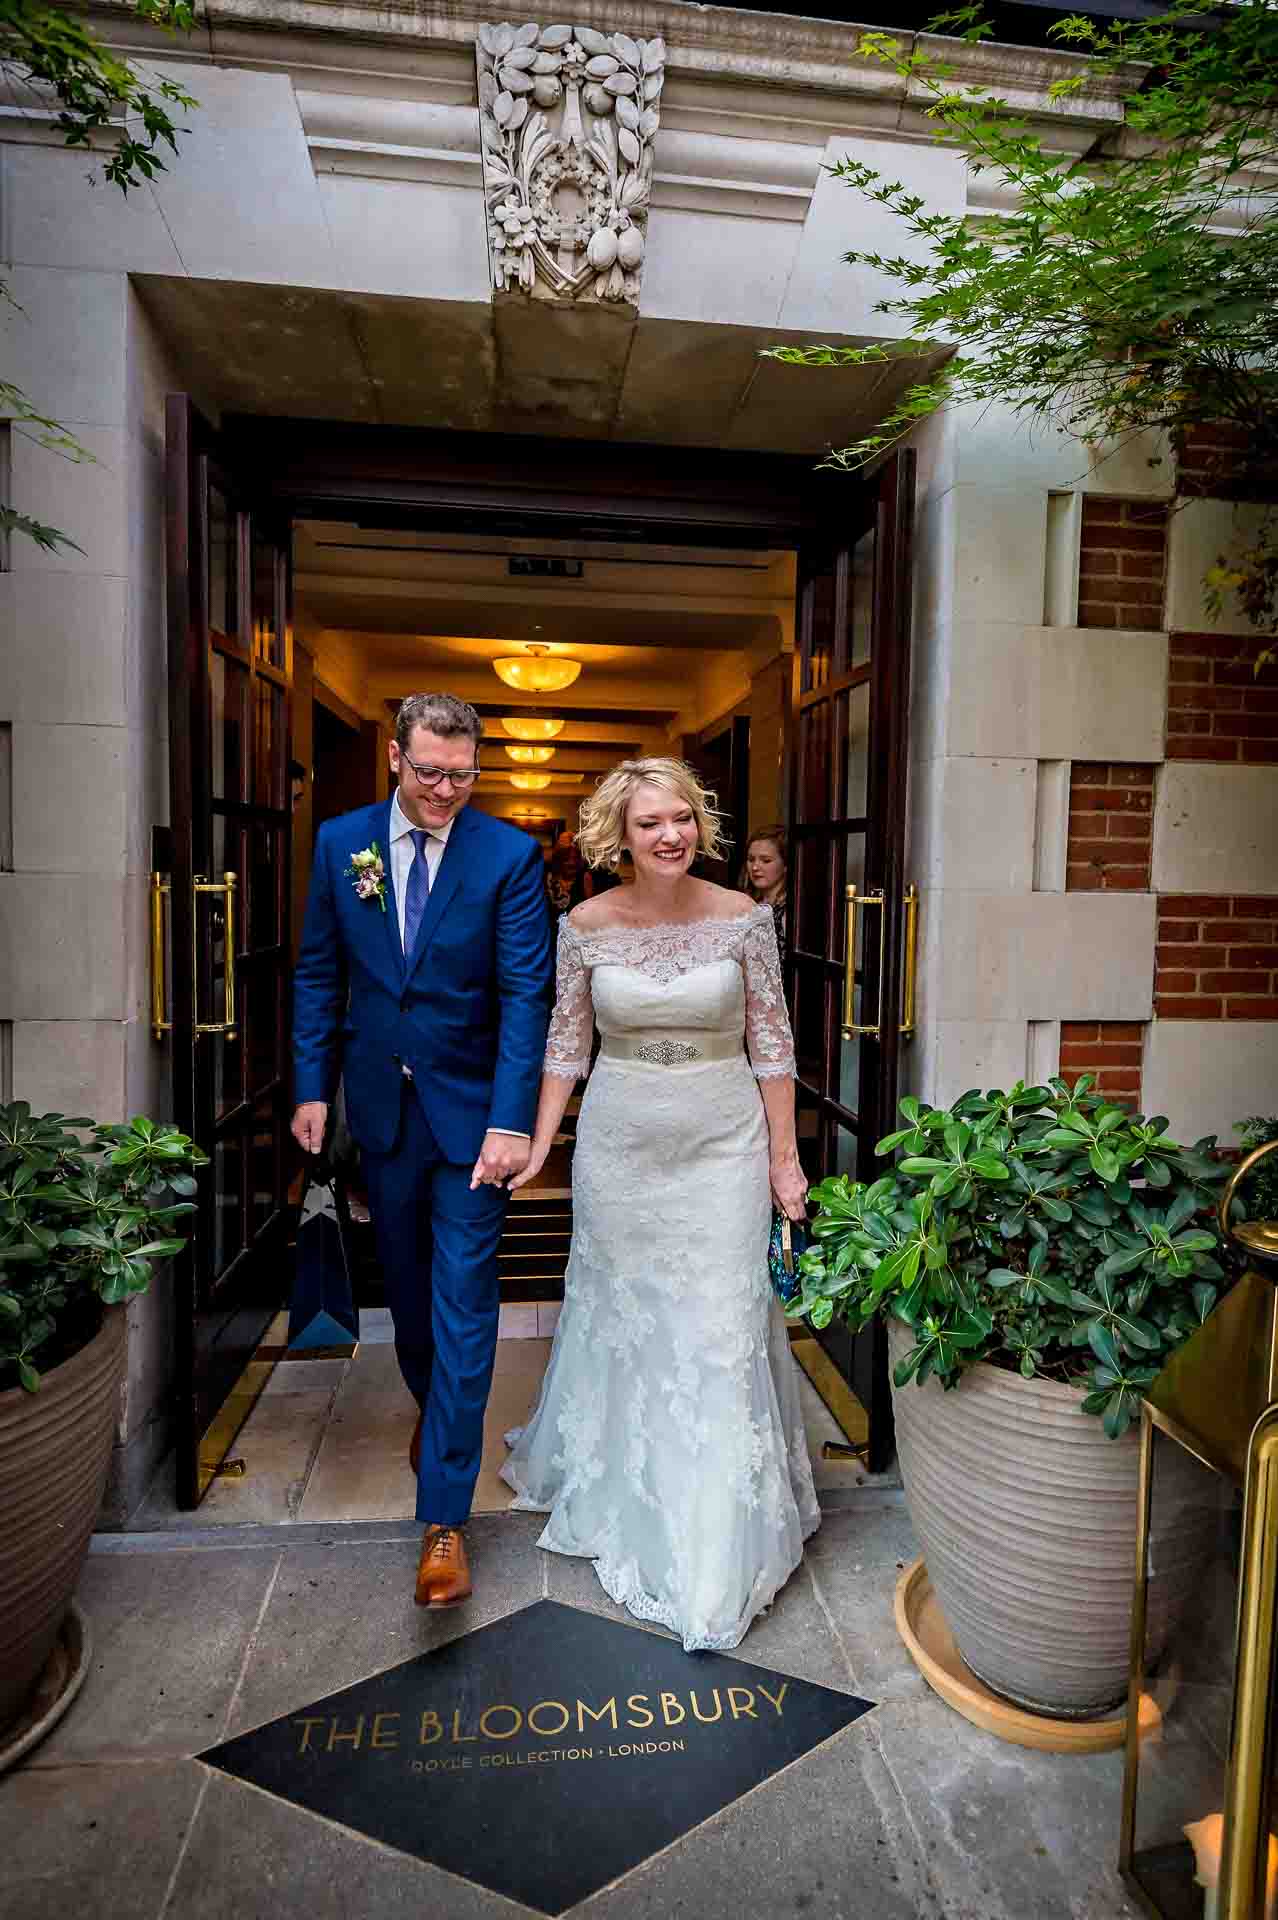 Newly-weds exiting through the front door of the Bloomsbury Hotel, London